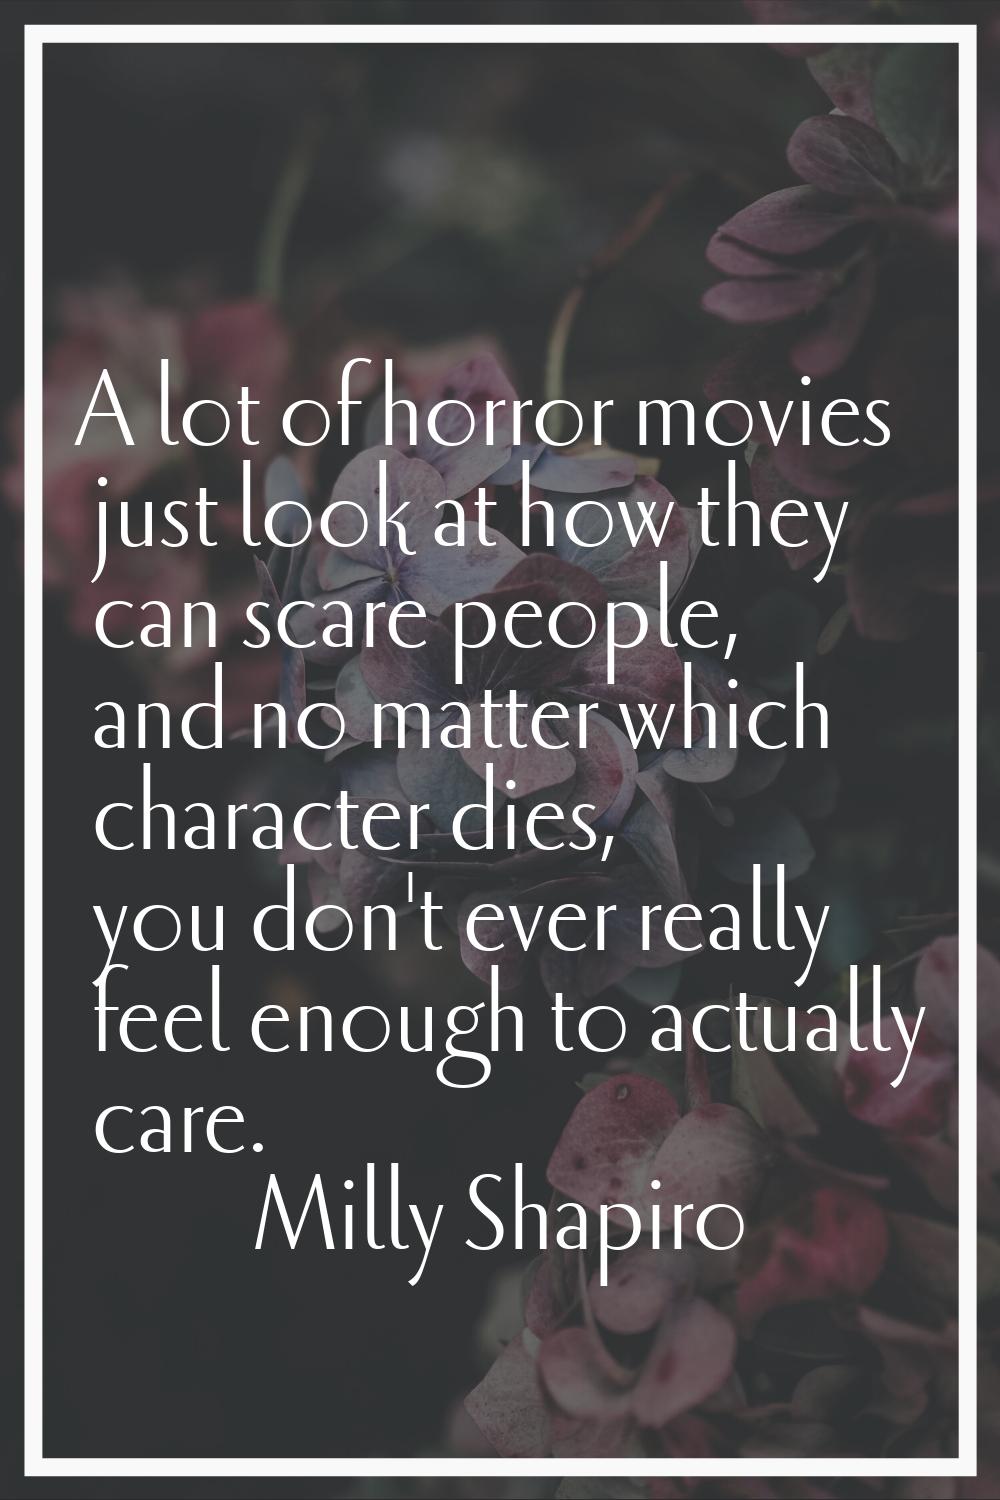 A lot of horror movies just look at how they can scare people, and no matter which character dies, 